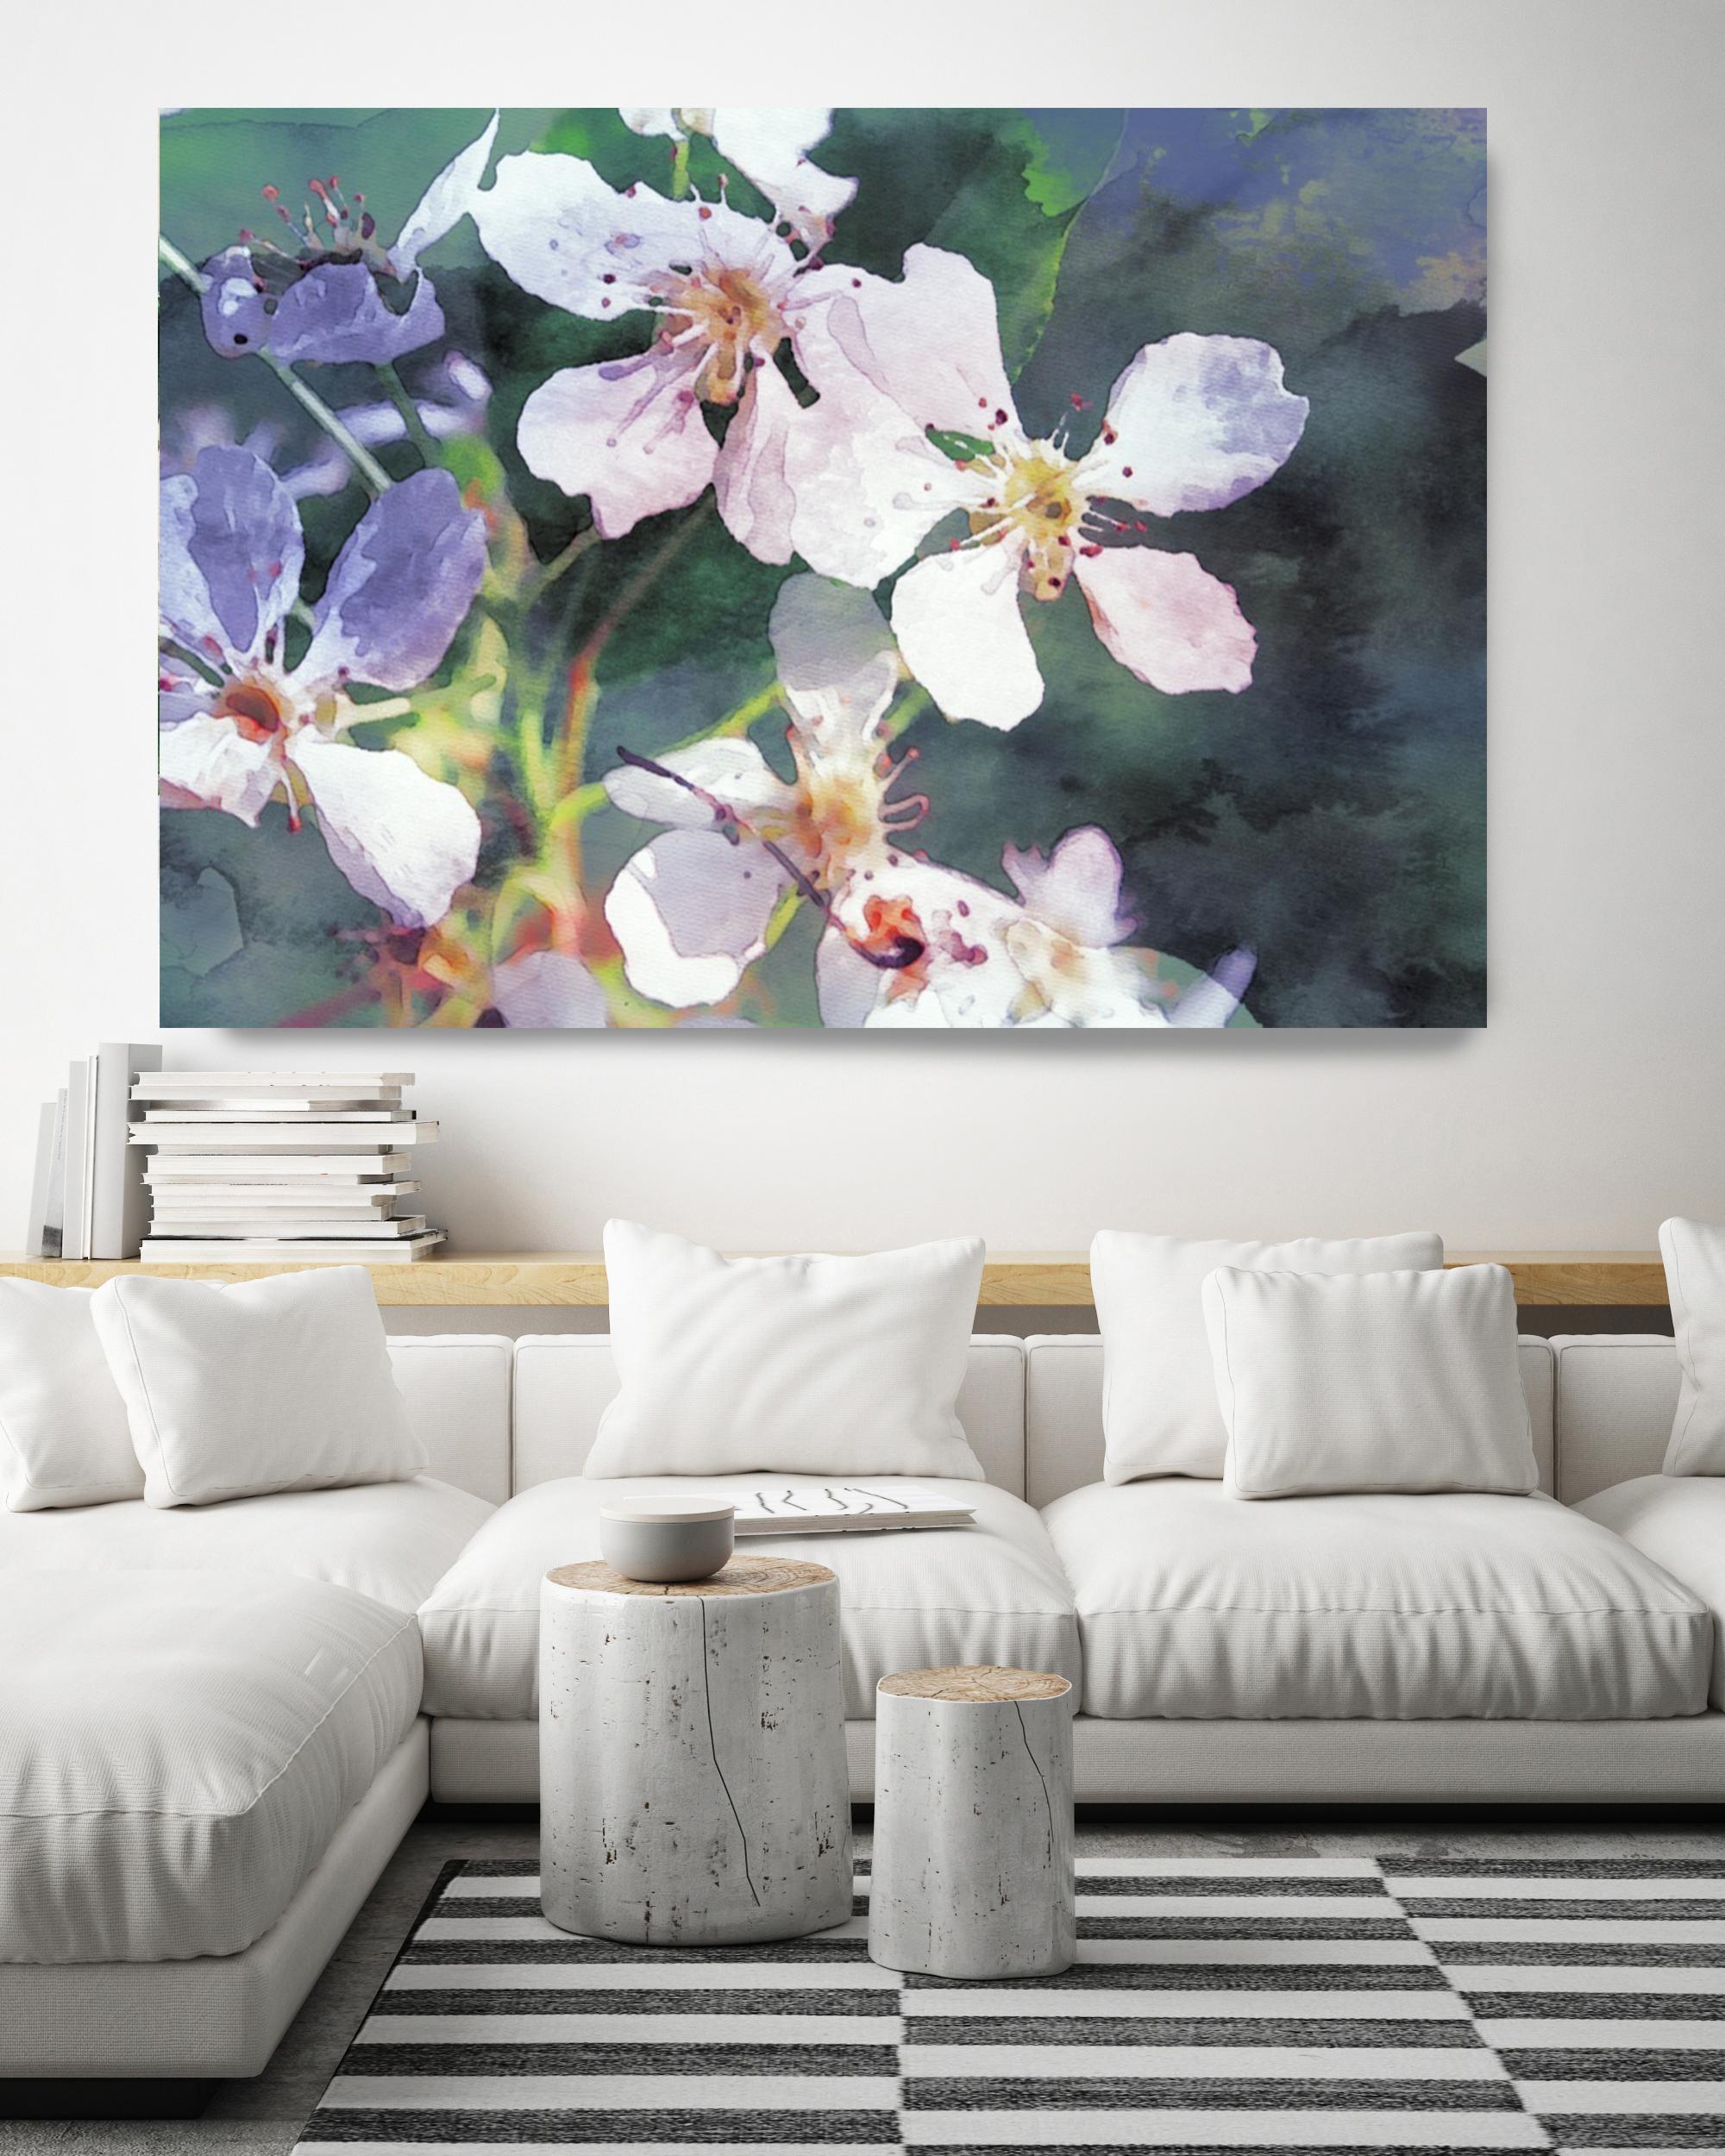 Green White Blooming Flowers Painting Embellished Giclee on Canvas 60WX40H